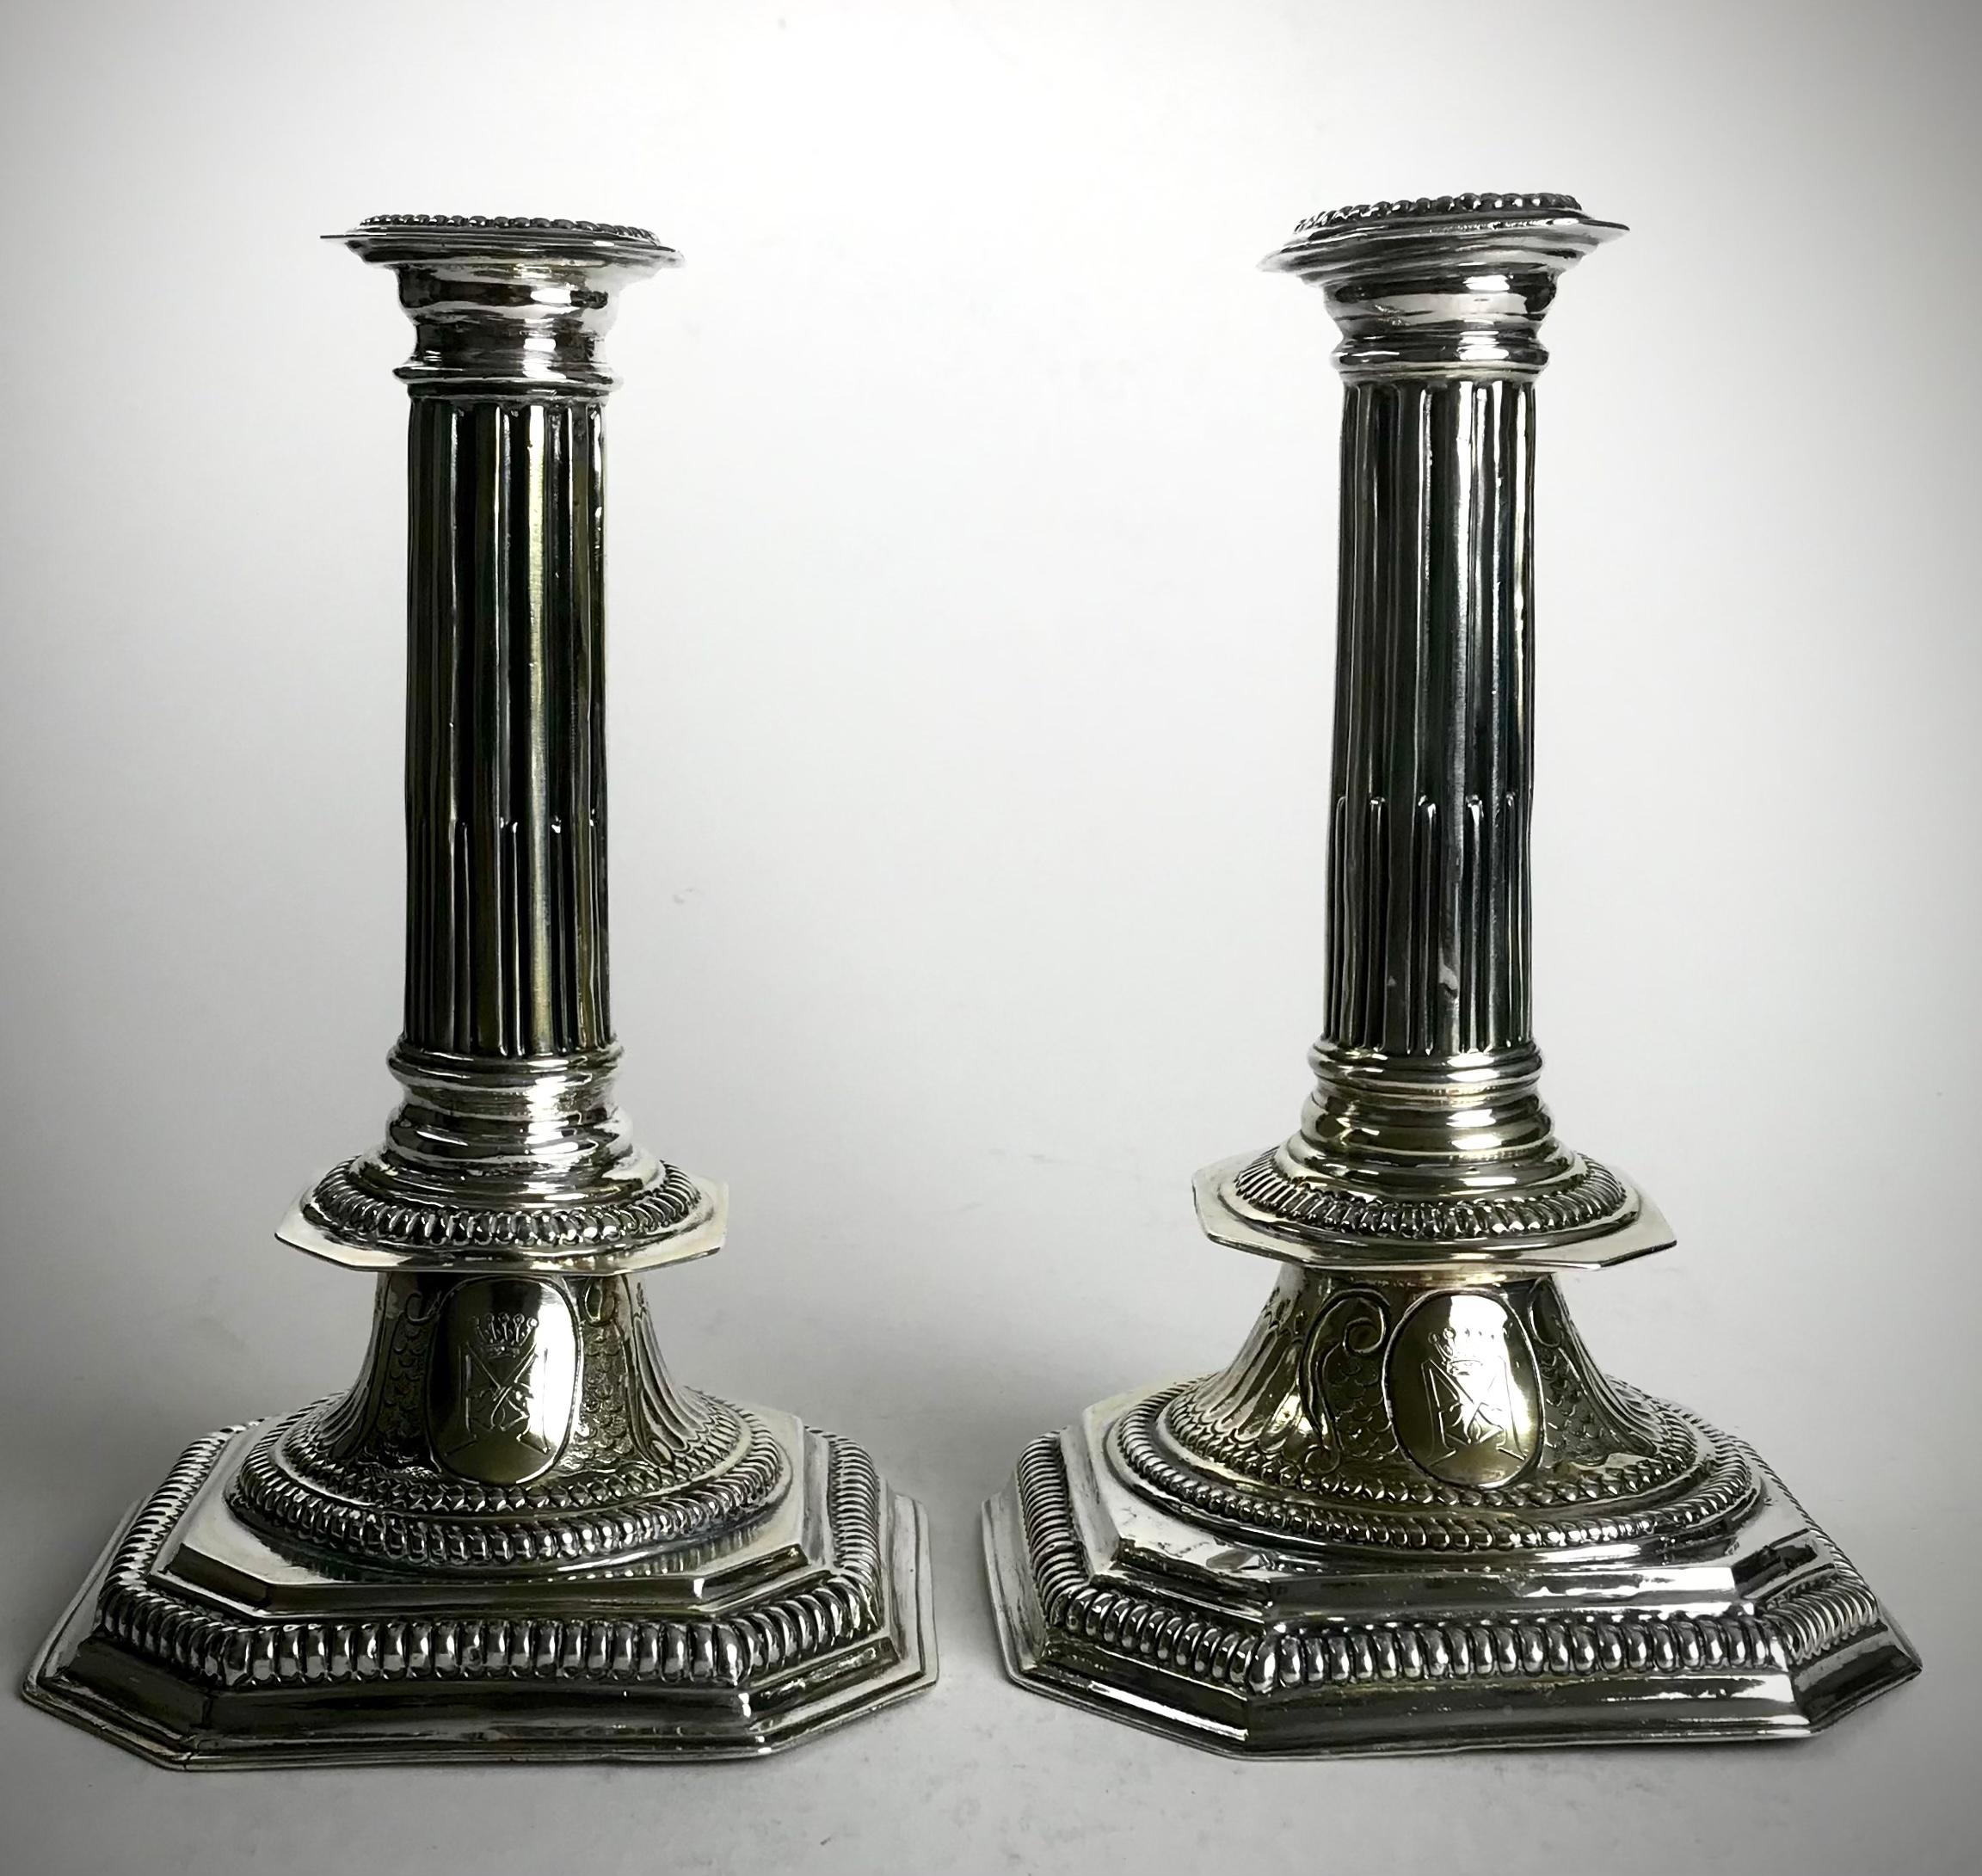 A magnificent pair of solid silver sterling candlesticks 

Hallmarked for london 1705
Silversmith John Barnard 

Weight 609 grams 
Height 21.5 cm 

Square bases with chamfered edges supporting fluted columnar shafts.

A wonderful pair of early